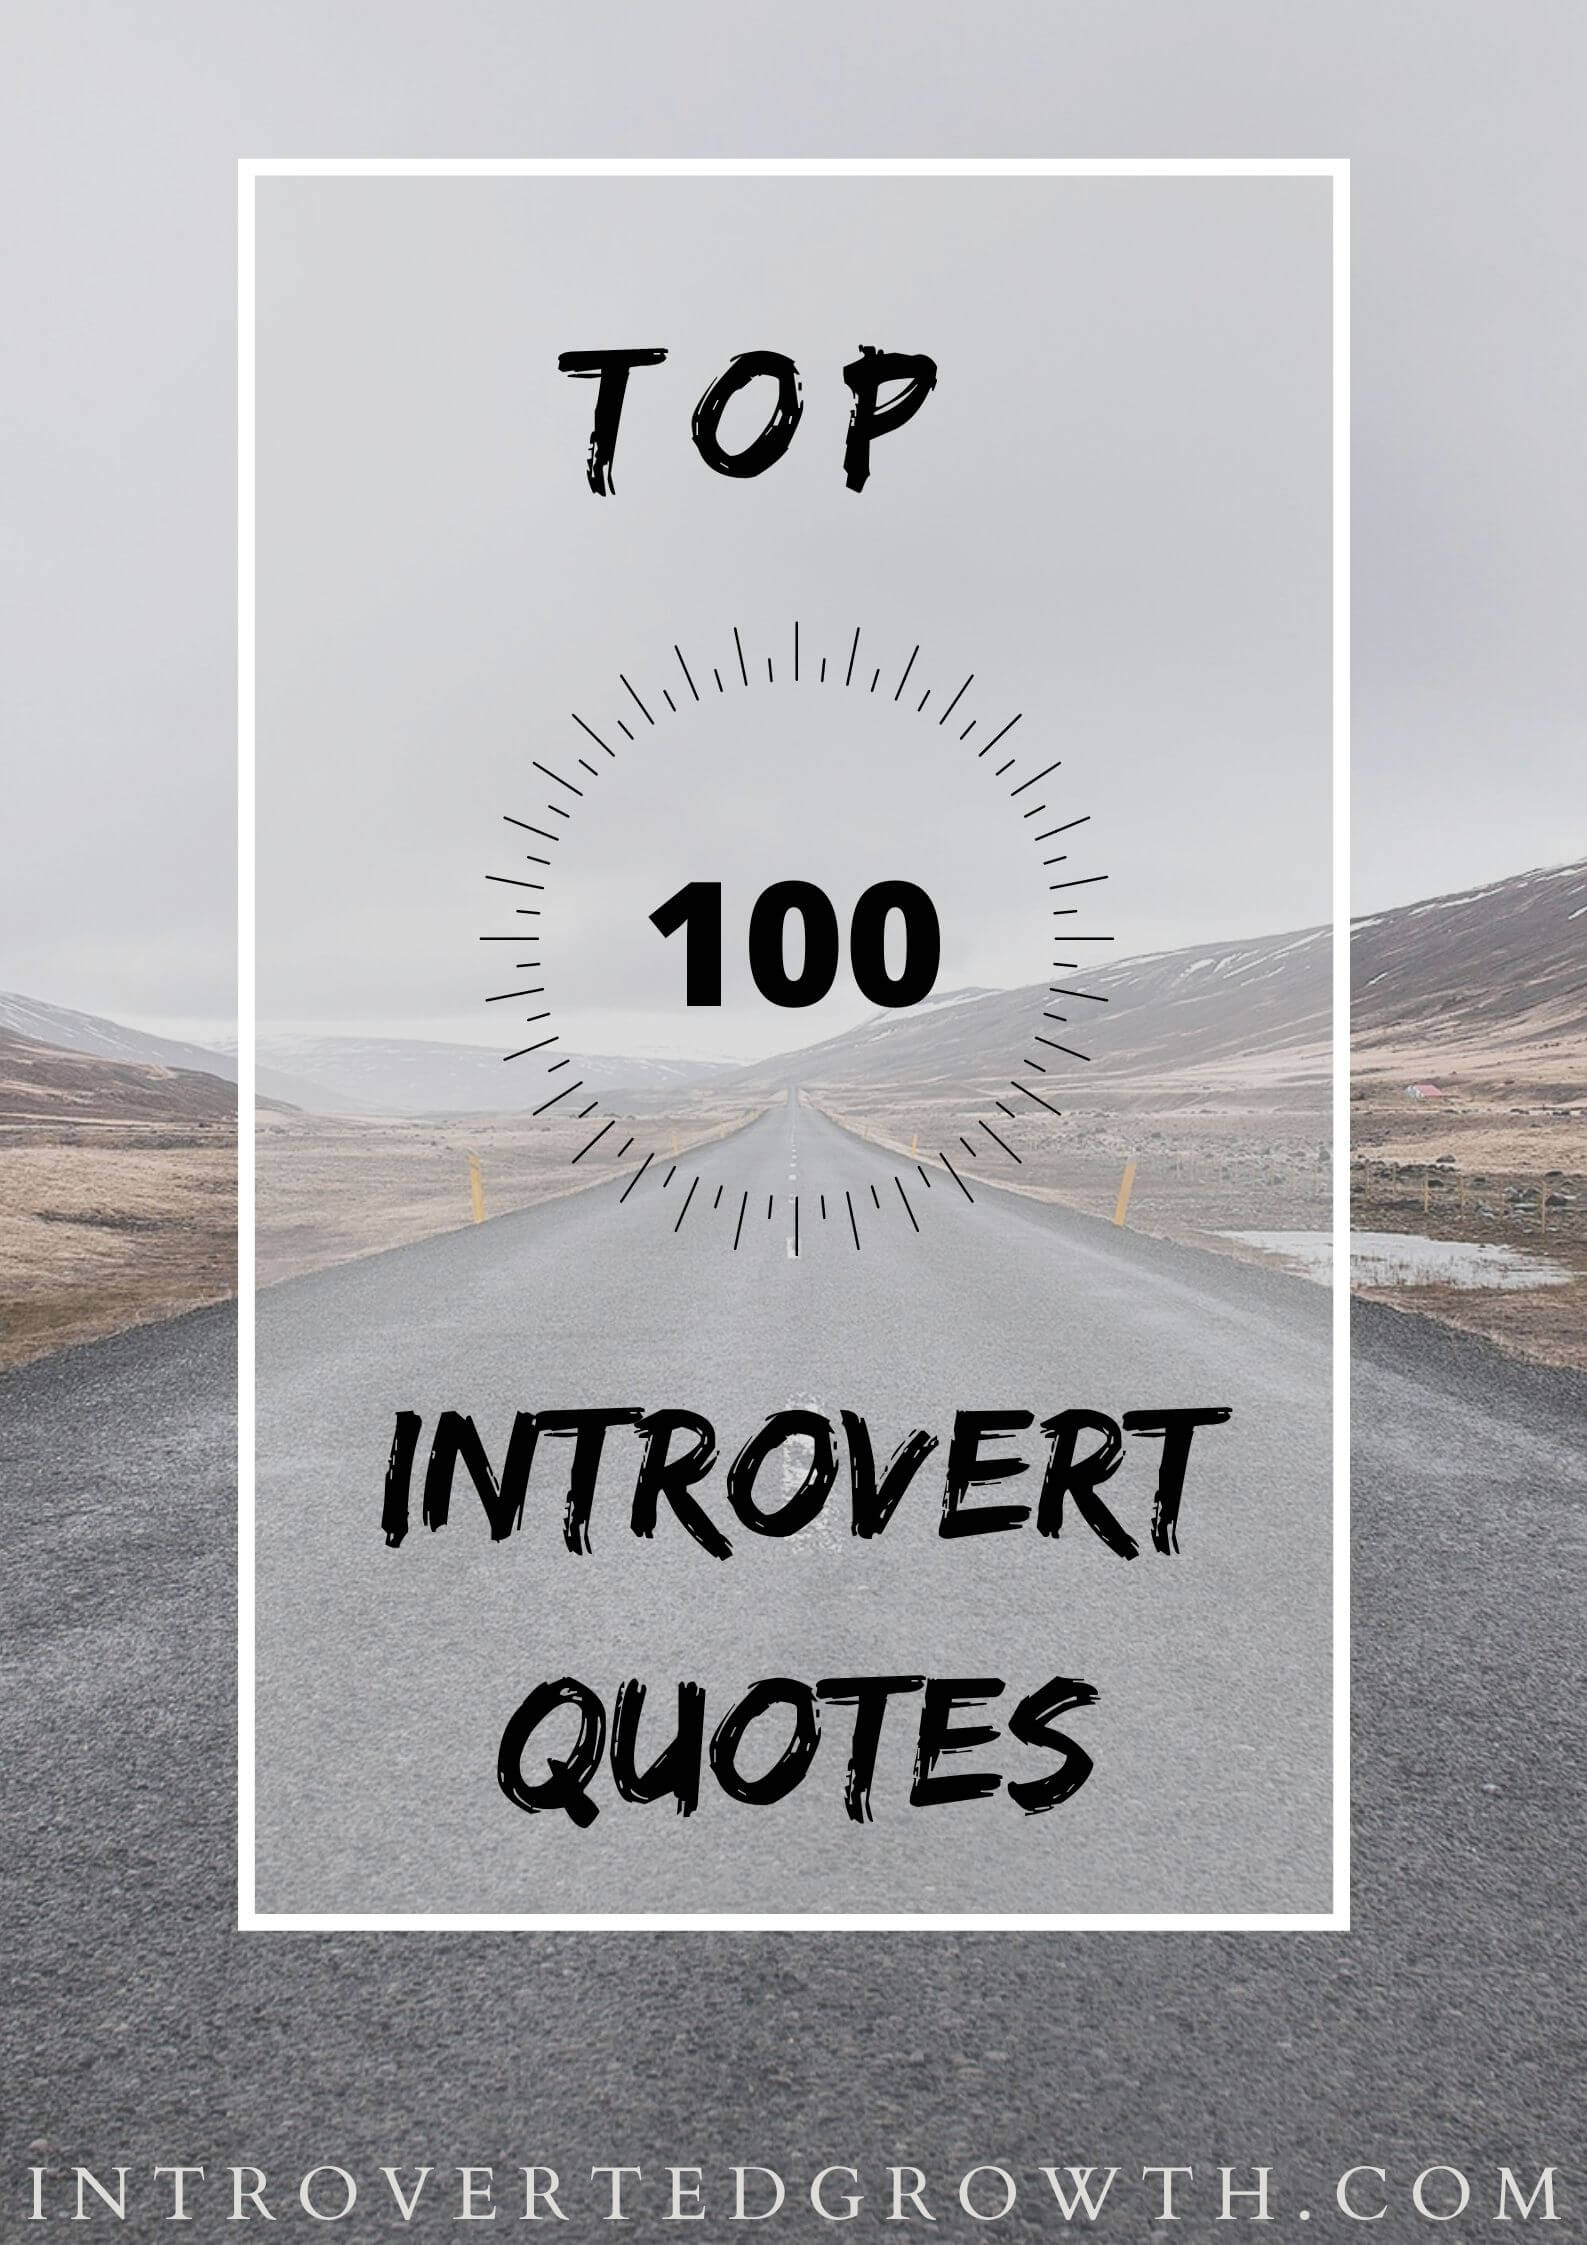 Top 100 Introvert Quotes - Introverted Growth